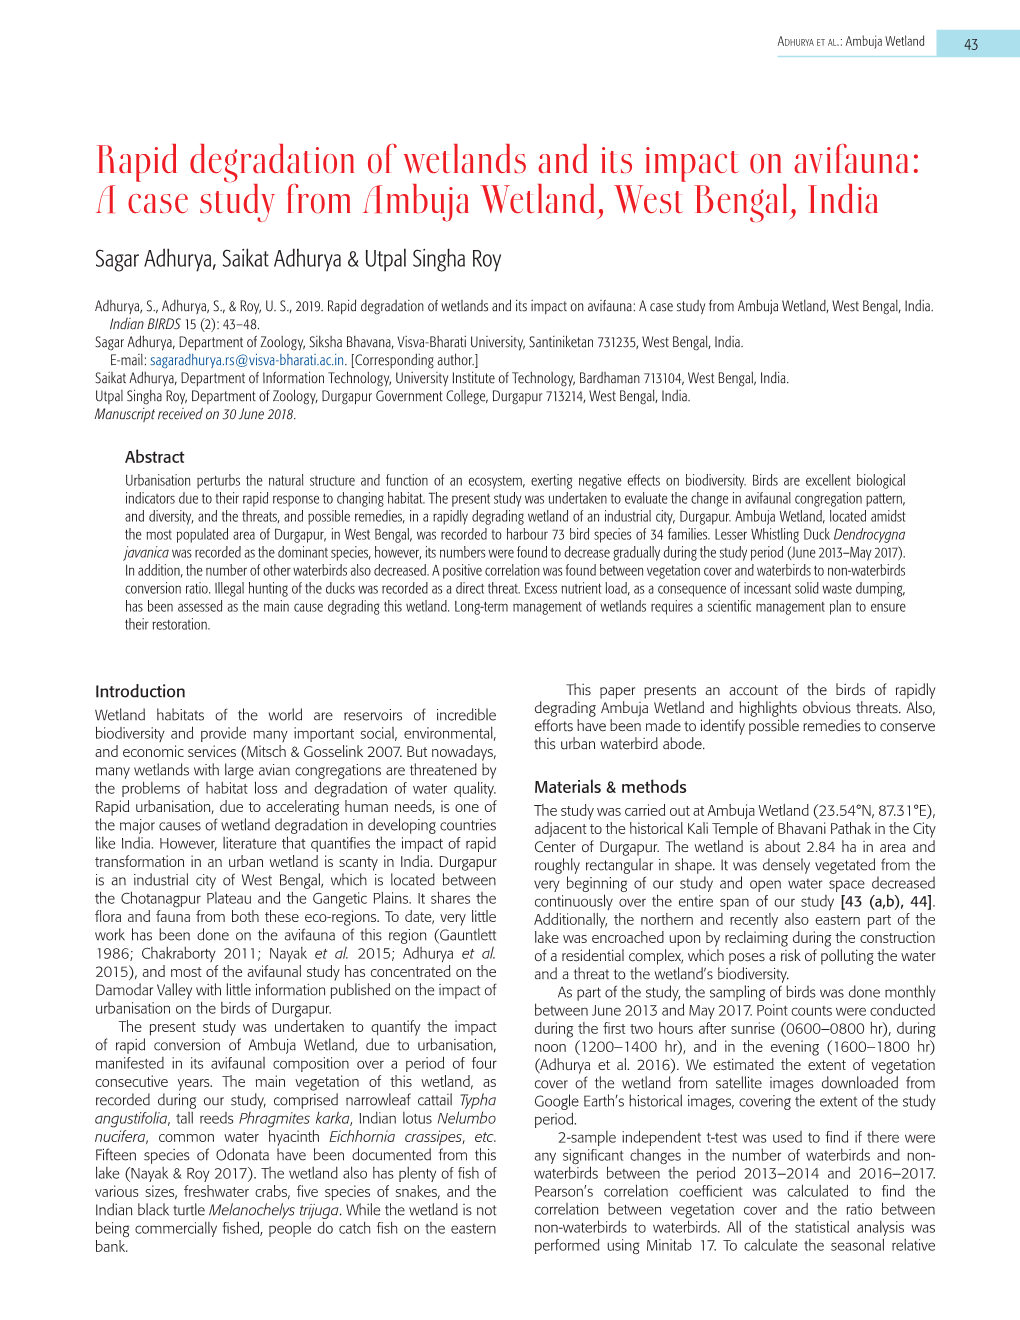 A Case Study from Ambuja Wetland, West Bengal, India